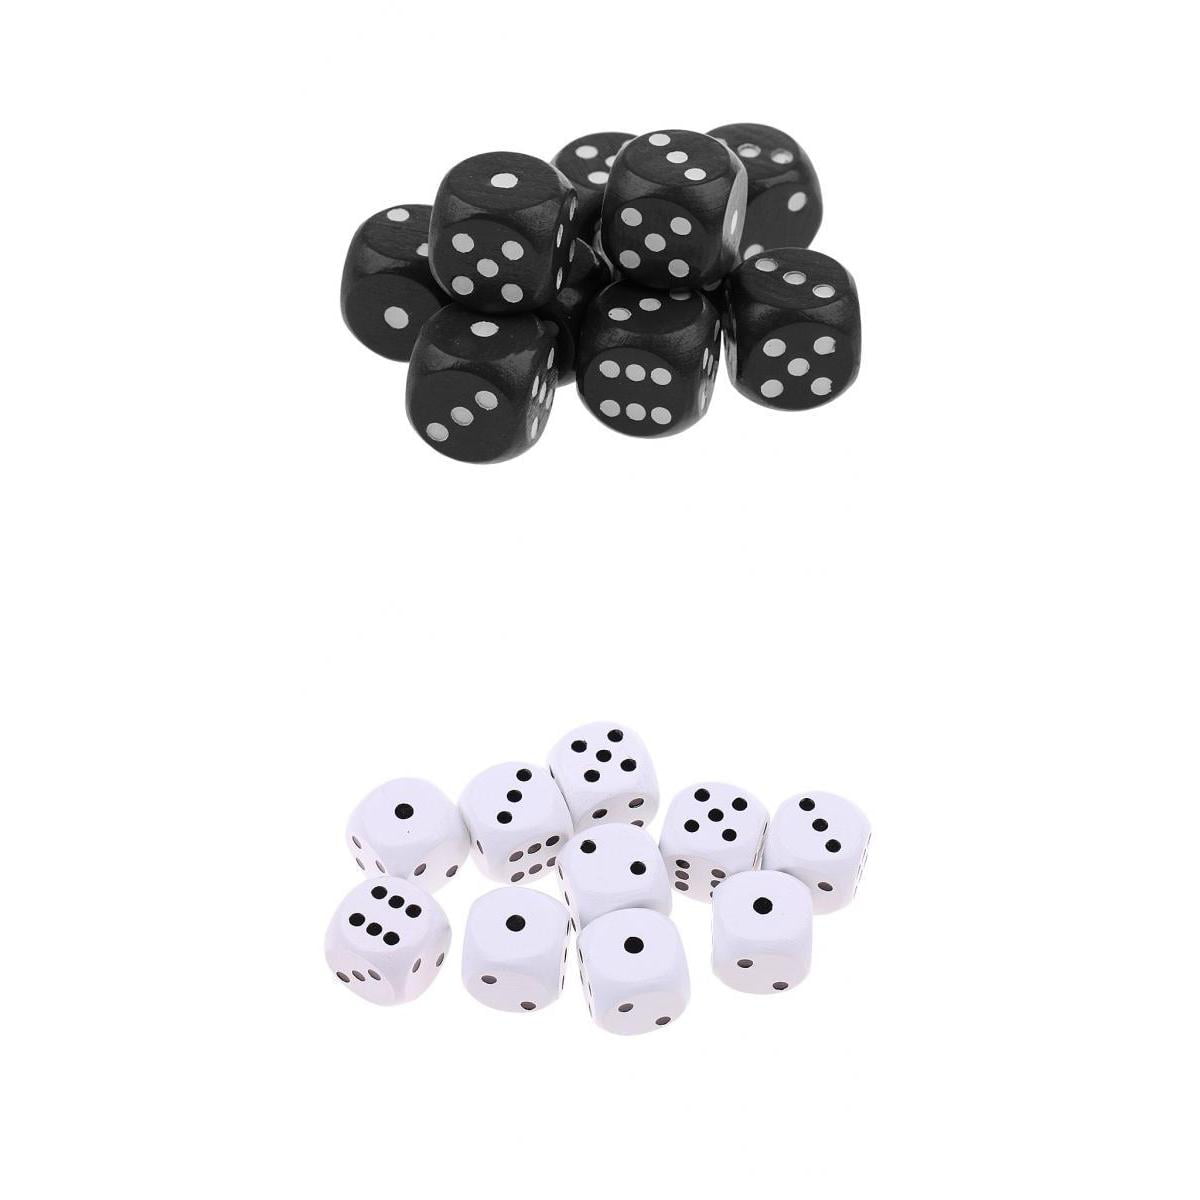 20pc 6 Sided Dice D6 Polyhedral Dice for  High quality 